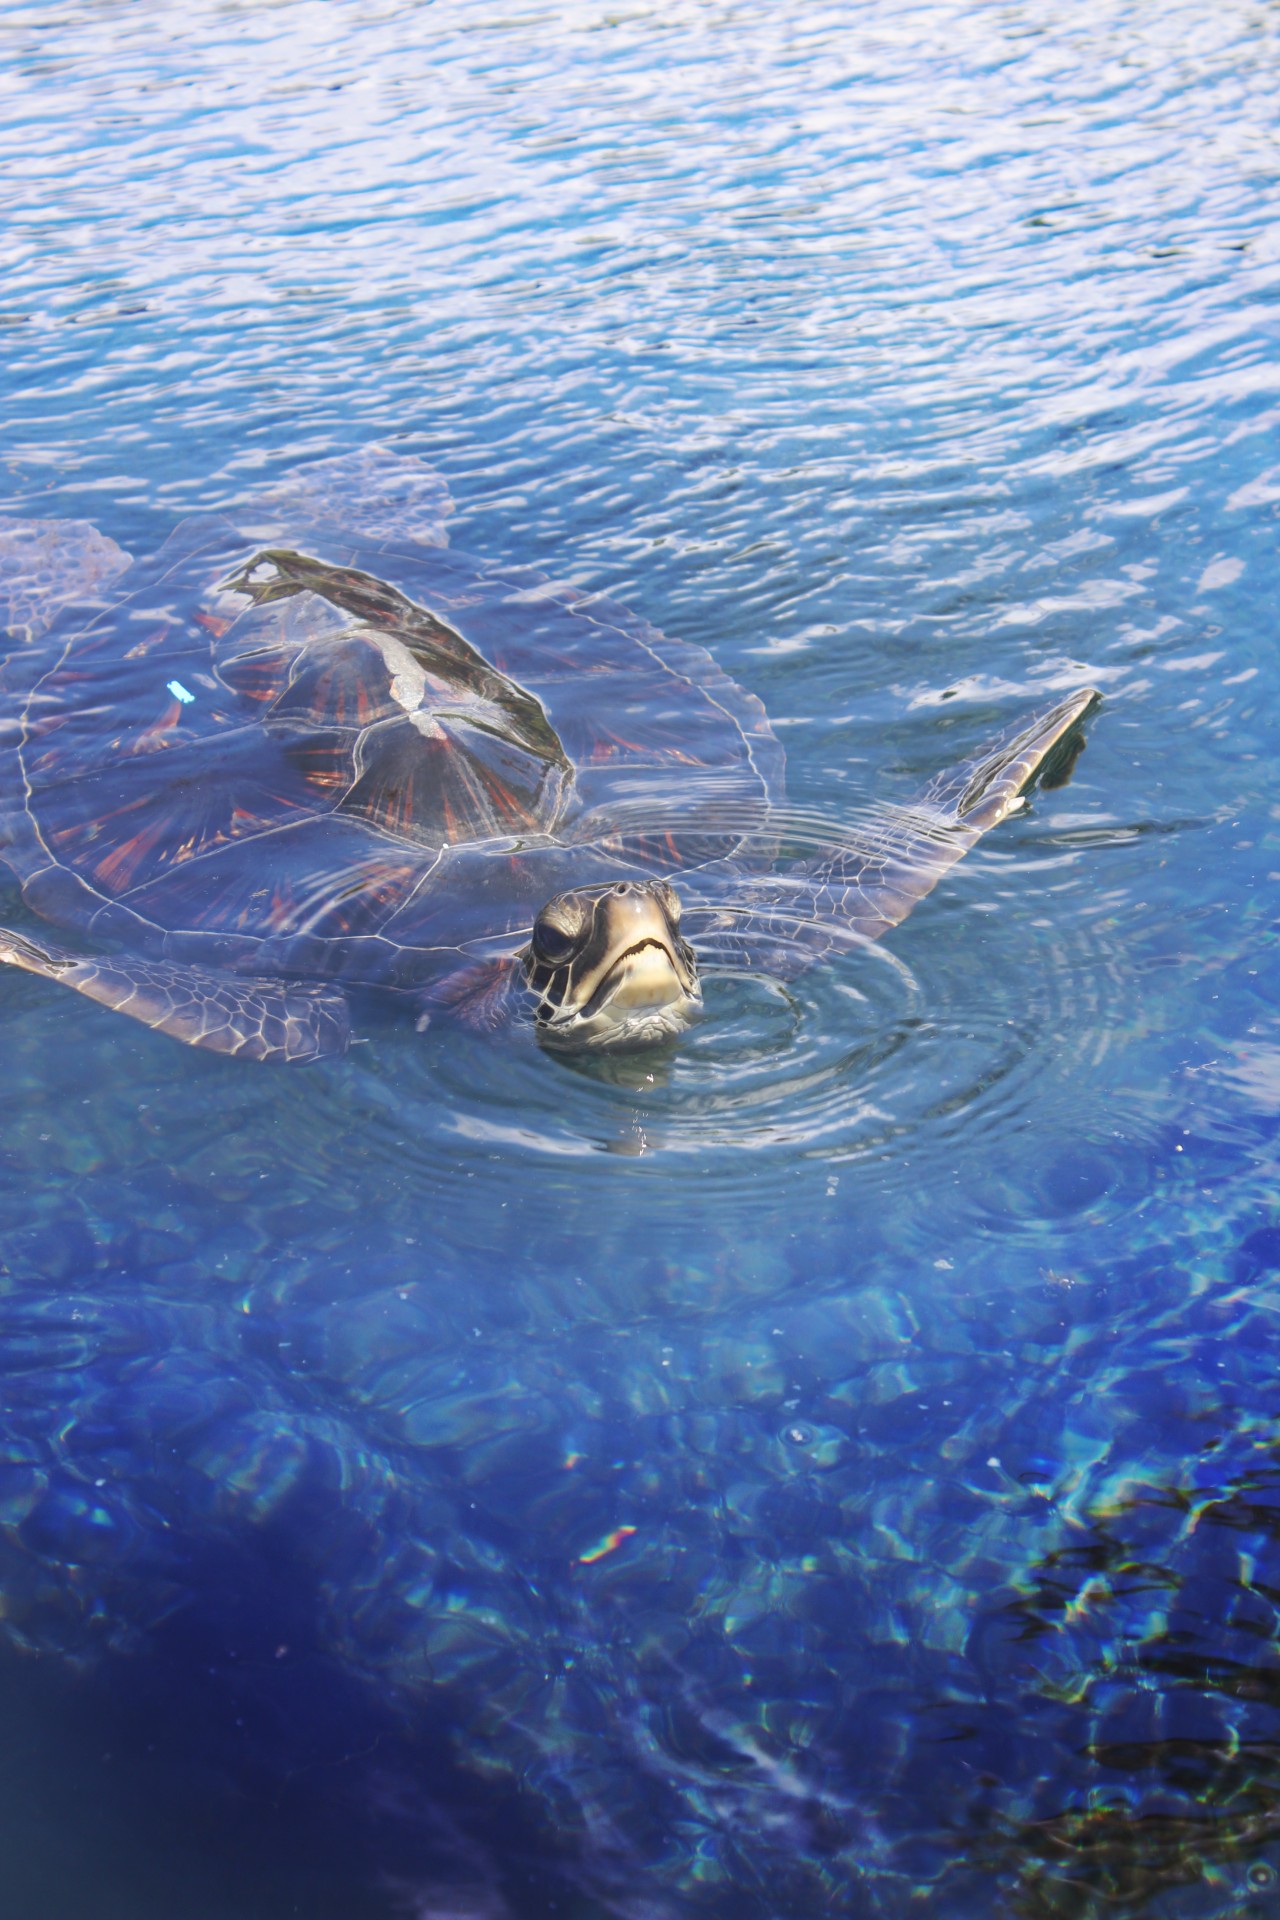 Sea turtle in the water.